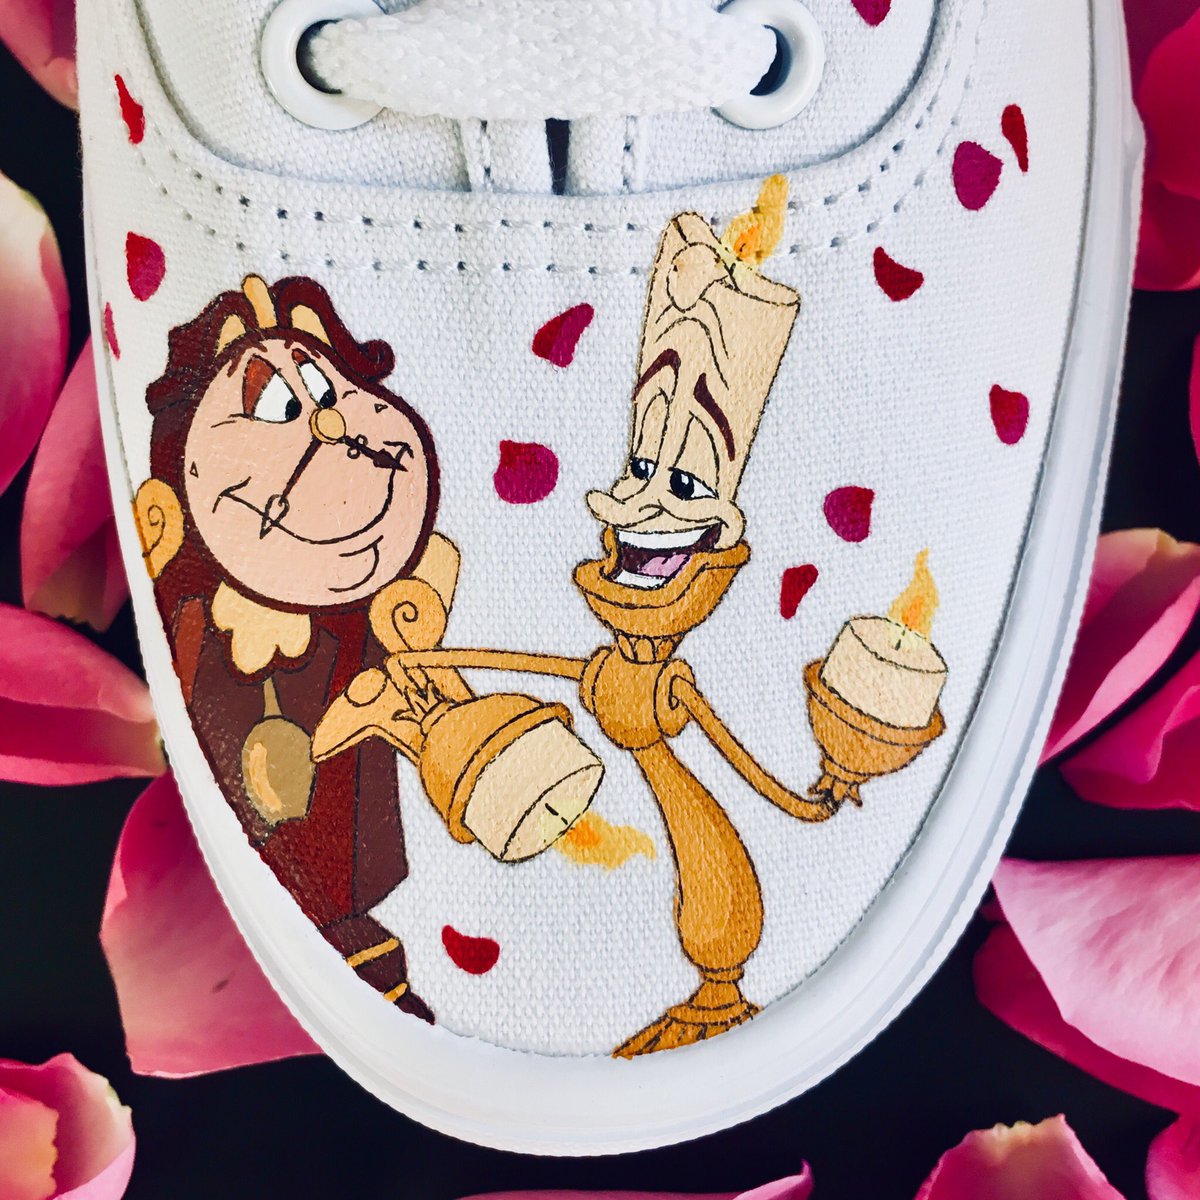 beauty and the beast vans uk